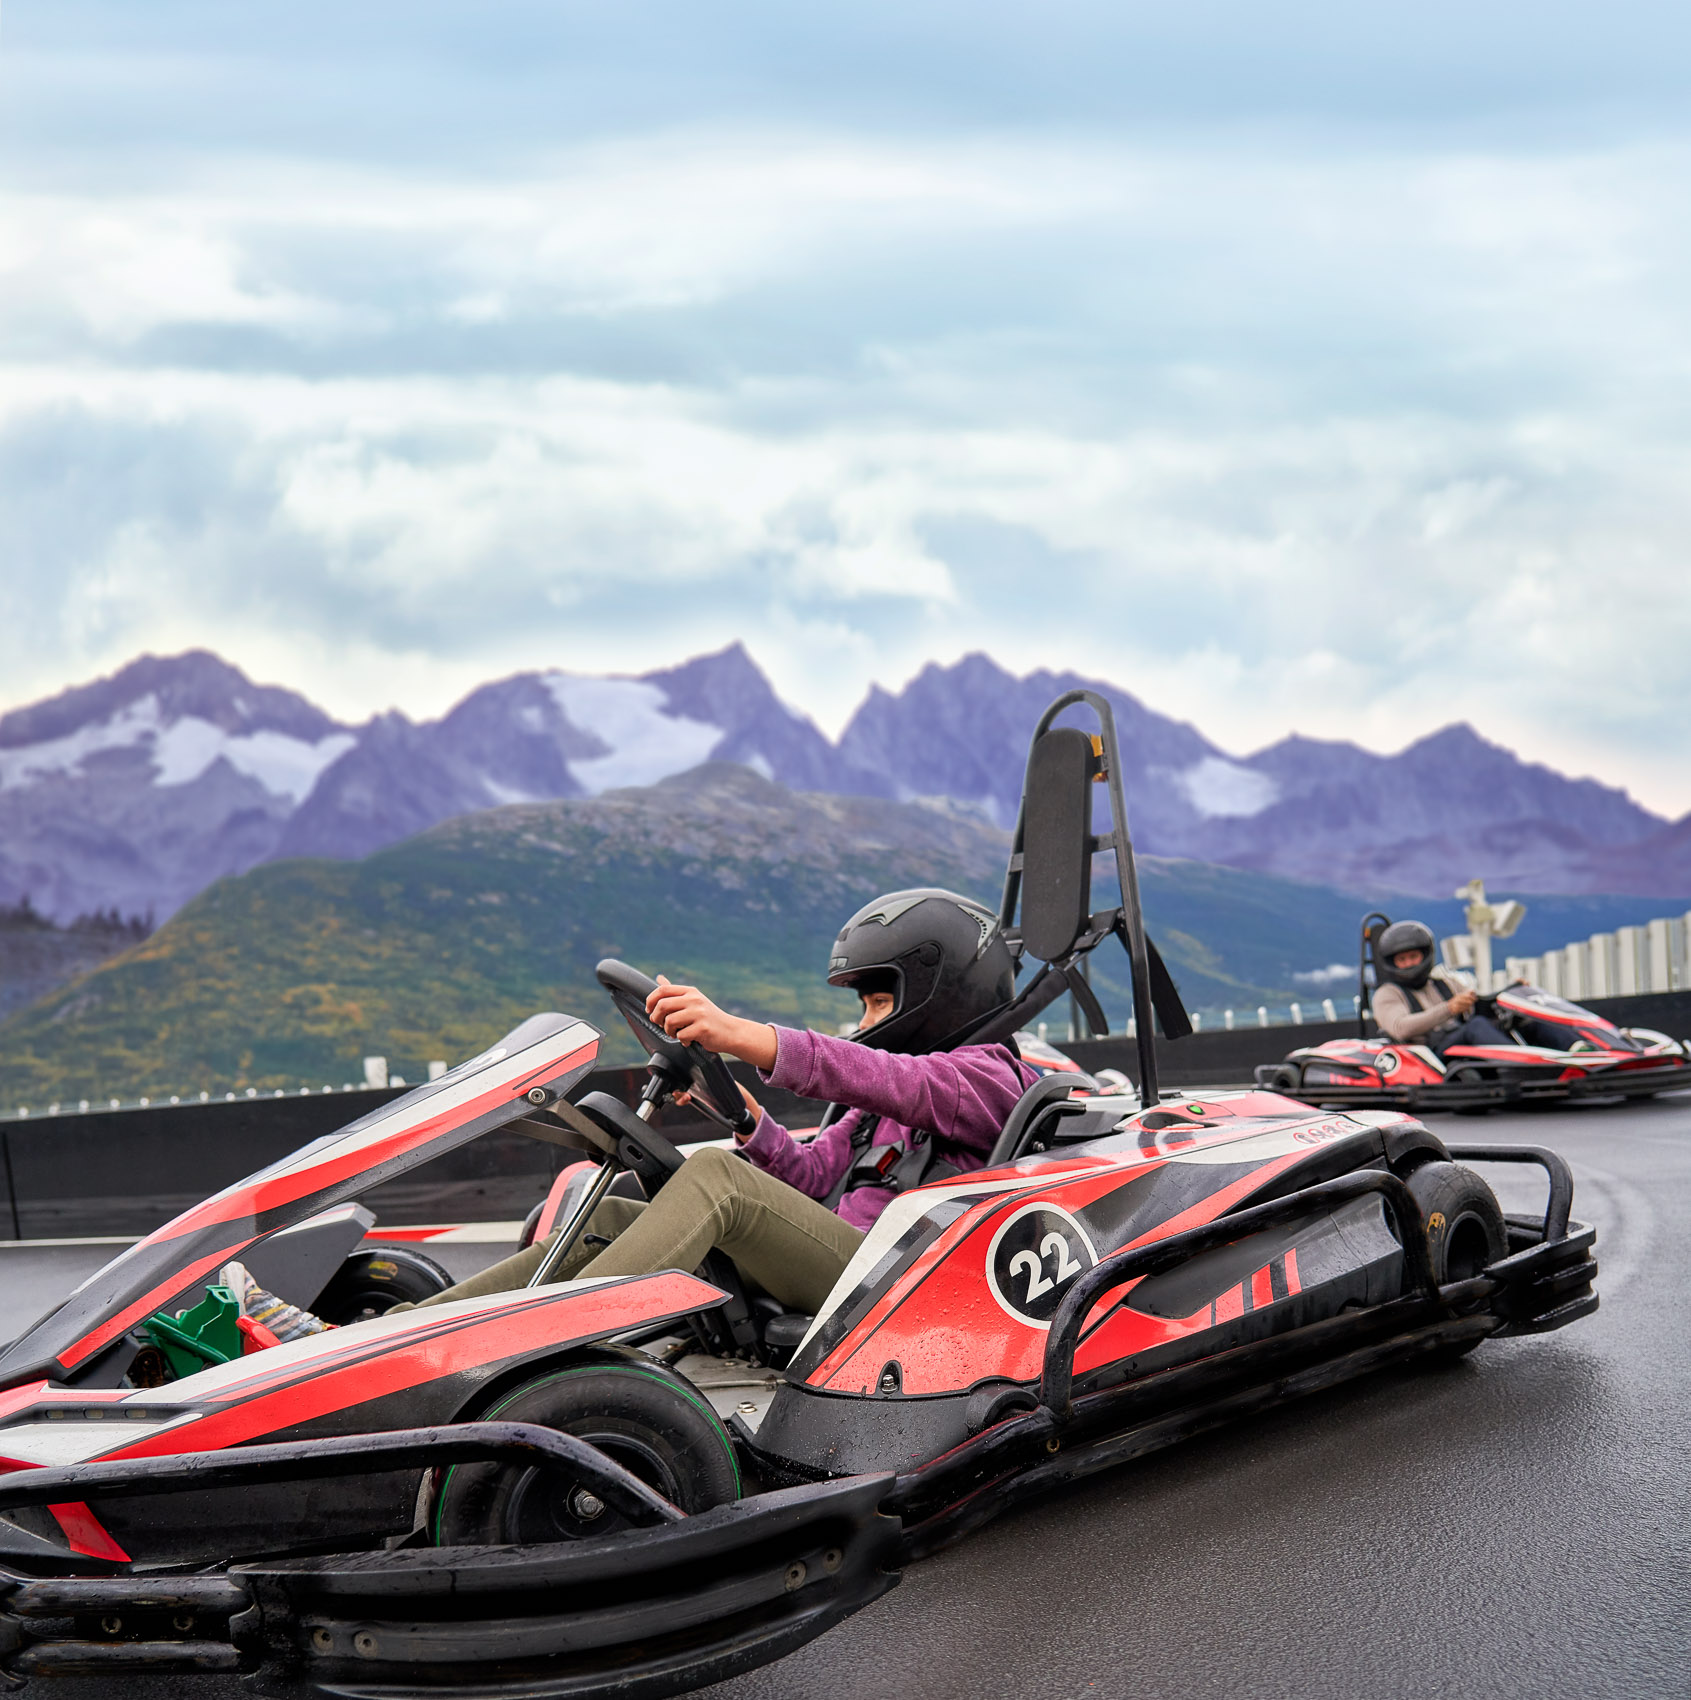 Racing go karts on the top deck of a cruise ship 